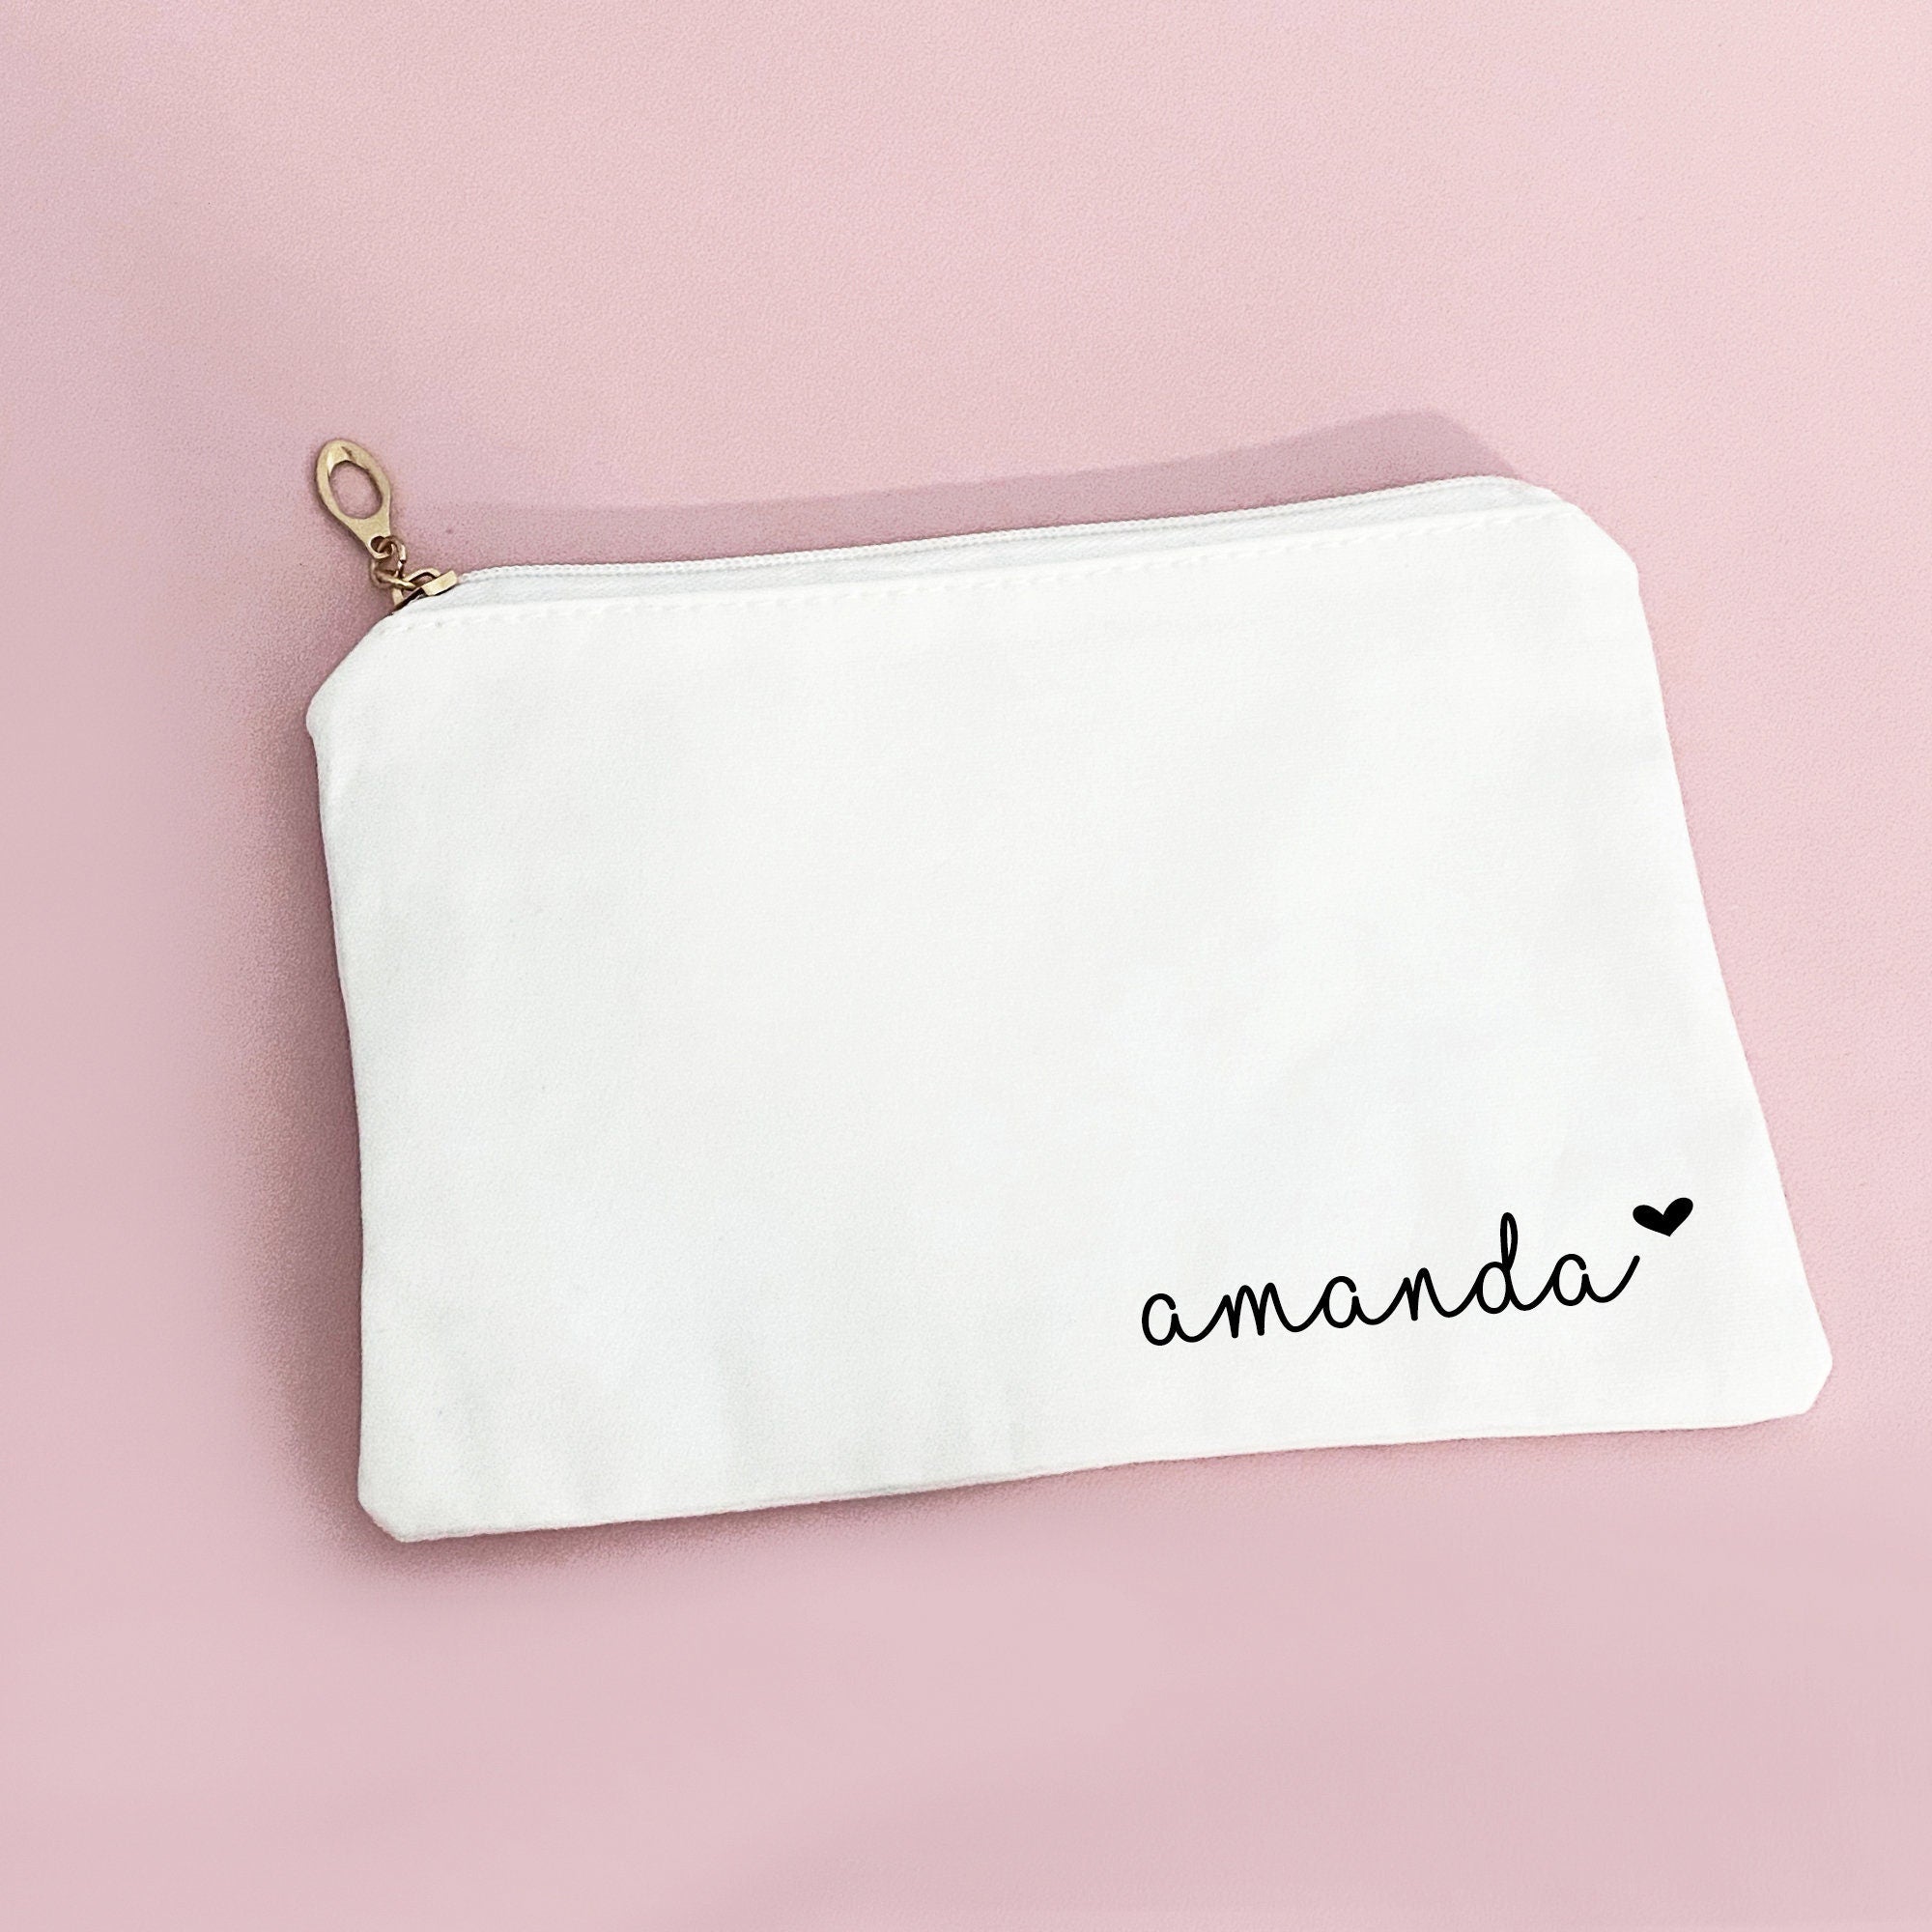 Custom Name Make Up Bag - Galentines Day Gifts - Personalizable Makeup Bag - Cute Valentines Day Gifts for Her - Gifts for Her